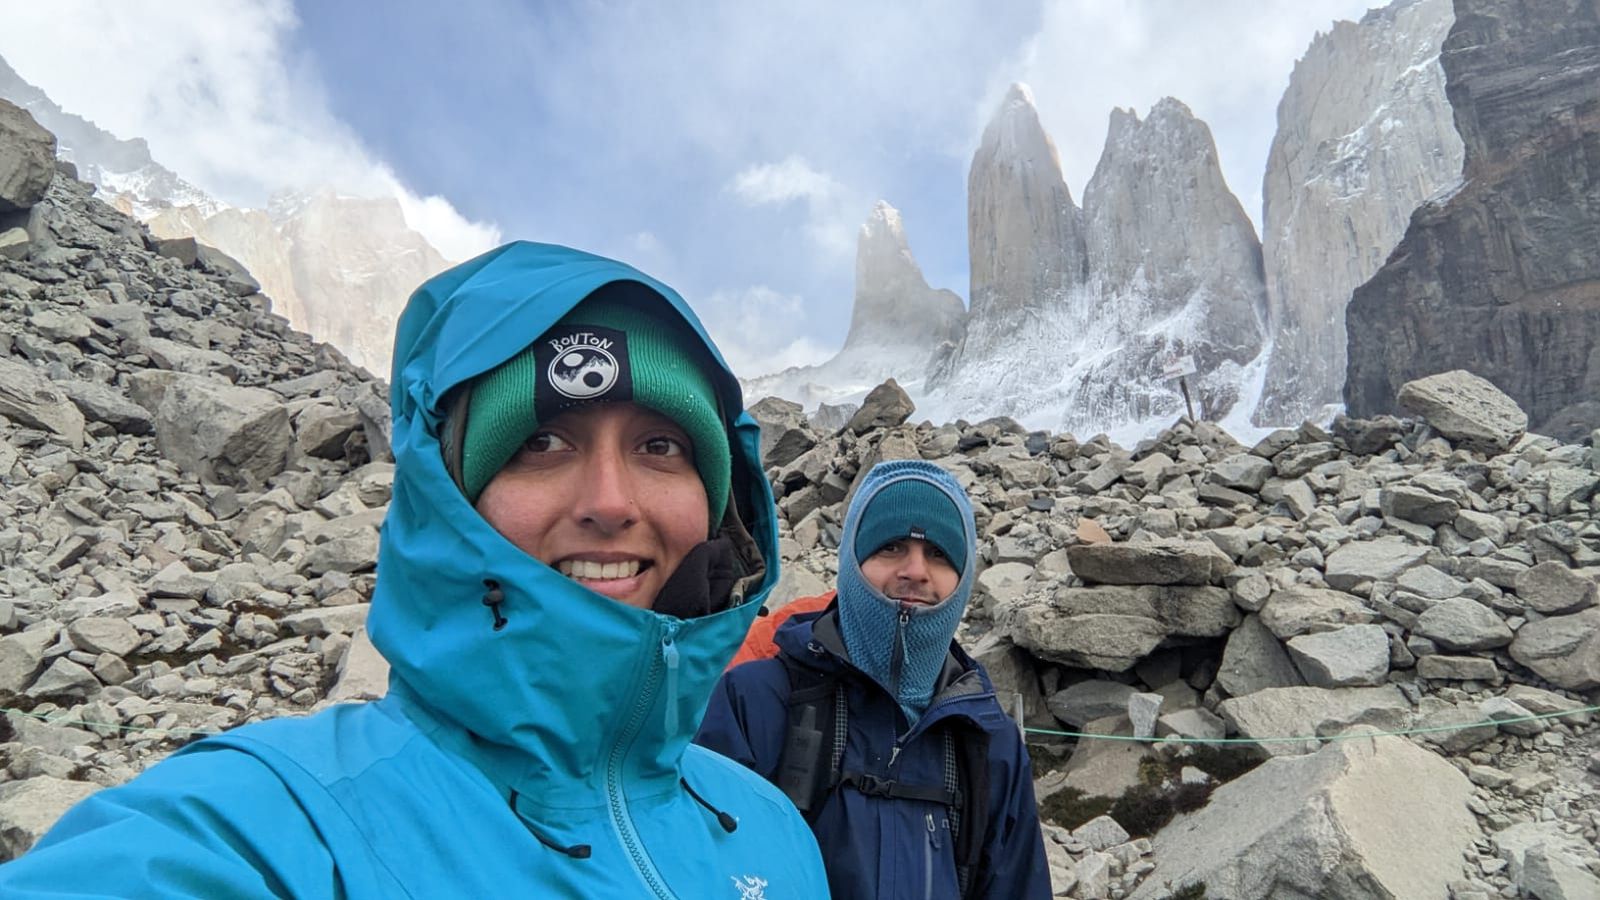 Day 56 - Hike to Torres del Paine